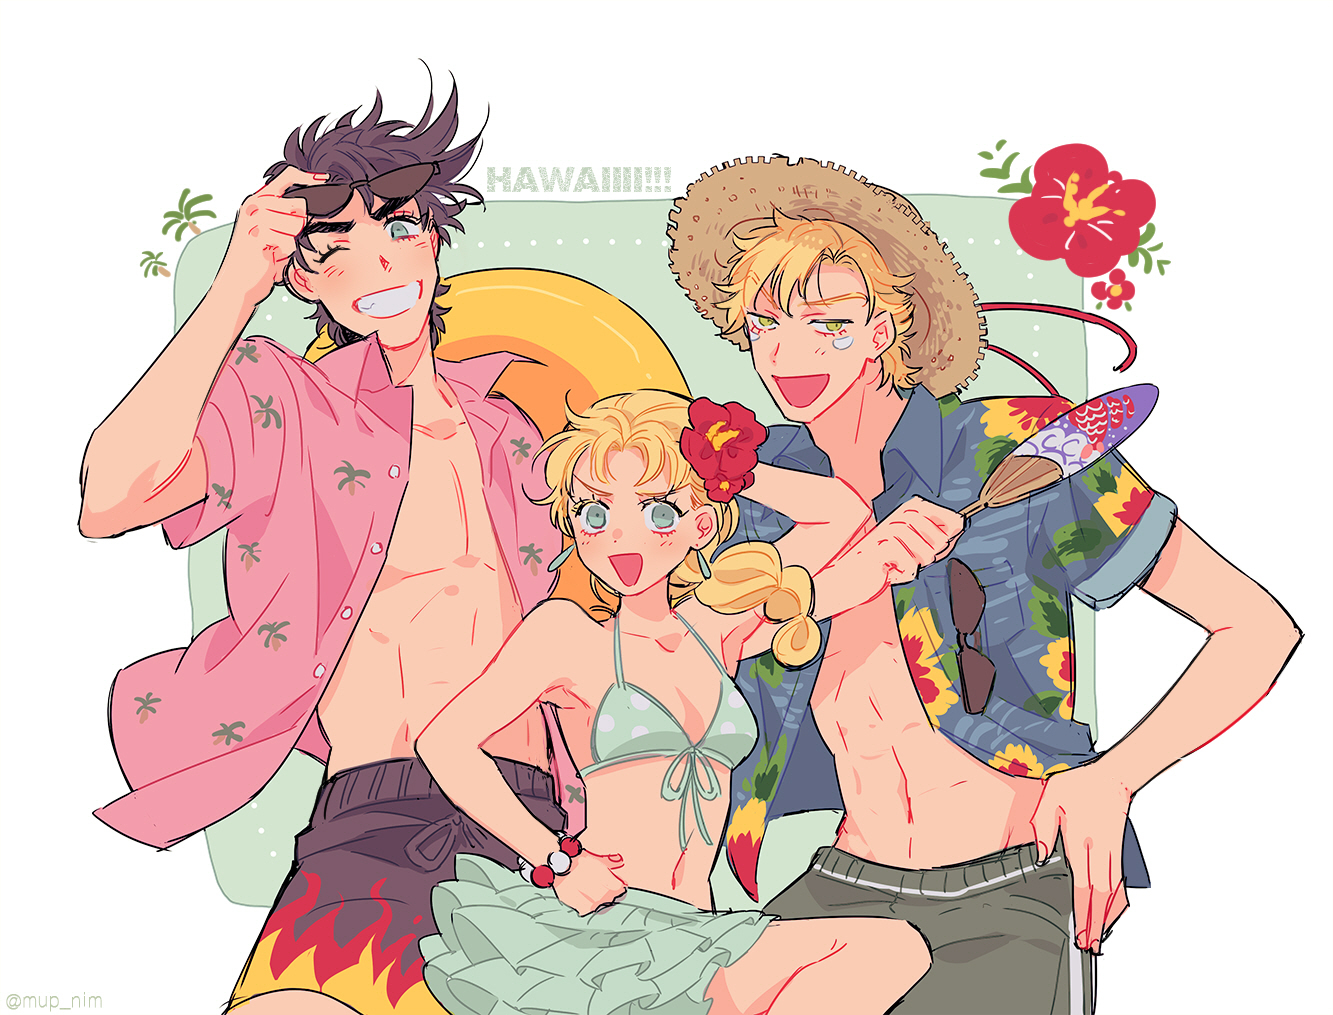 Let these first days of summer have been, to put it mildly, not very good, but let's hope that the rest of the summer will be NICE - Anime, Art, Anime art, Summer, Jojos bizarre adventure, Positive, Joseph Joestar